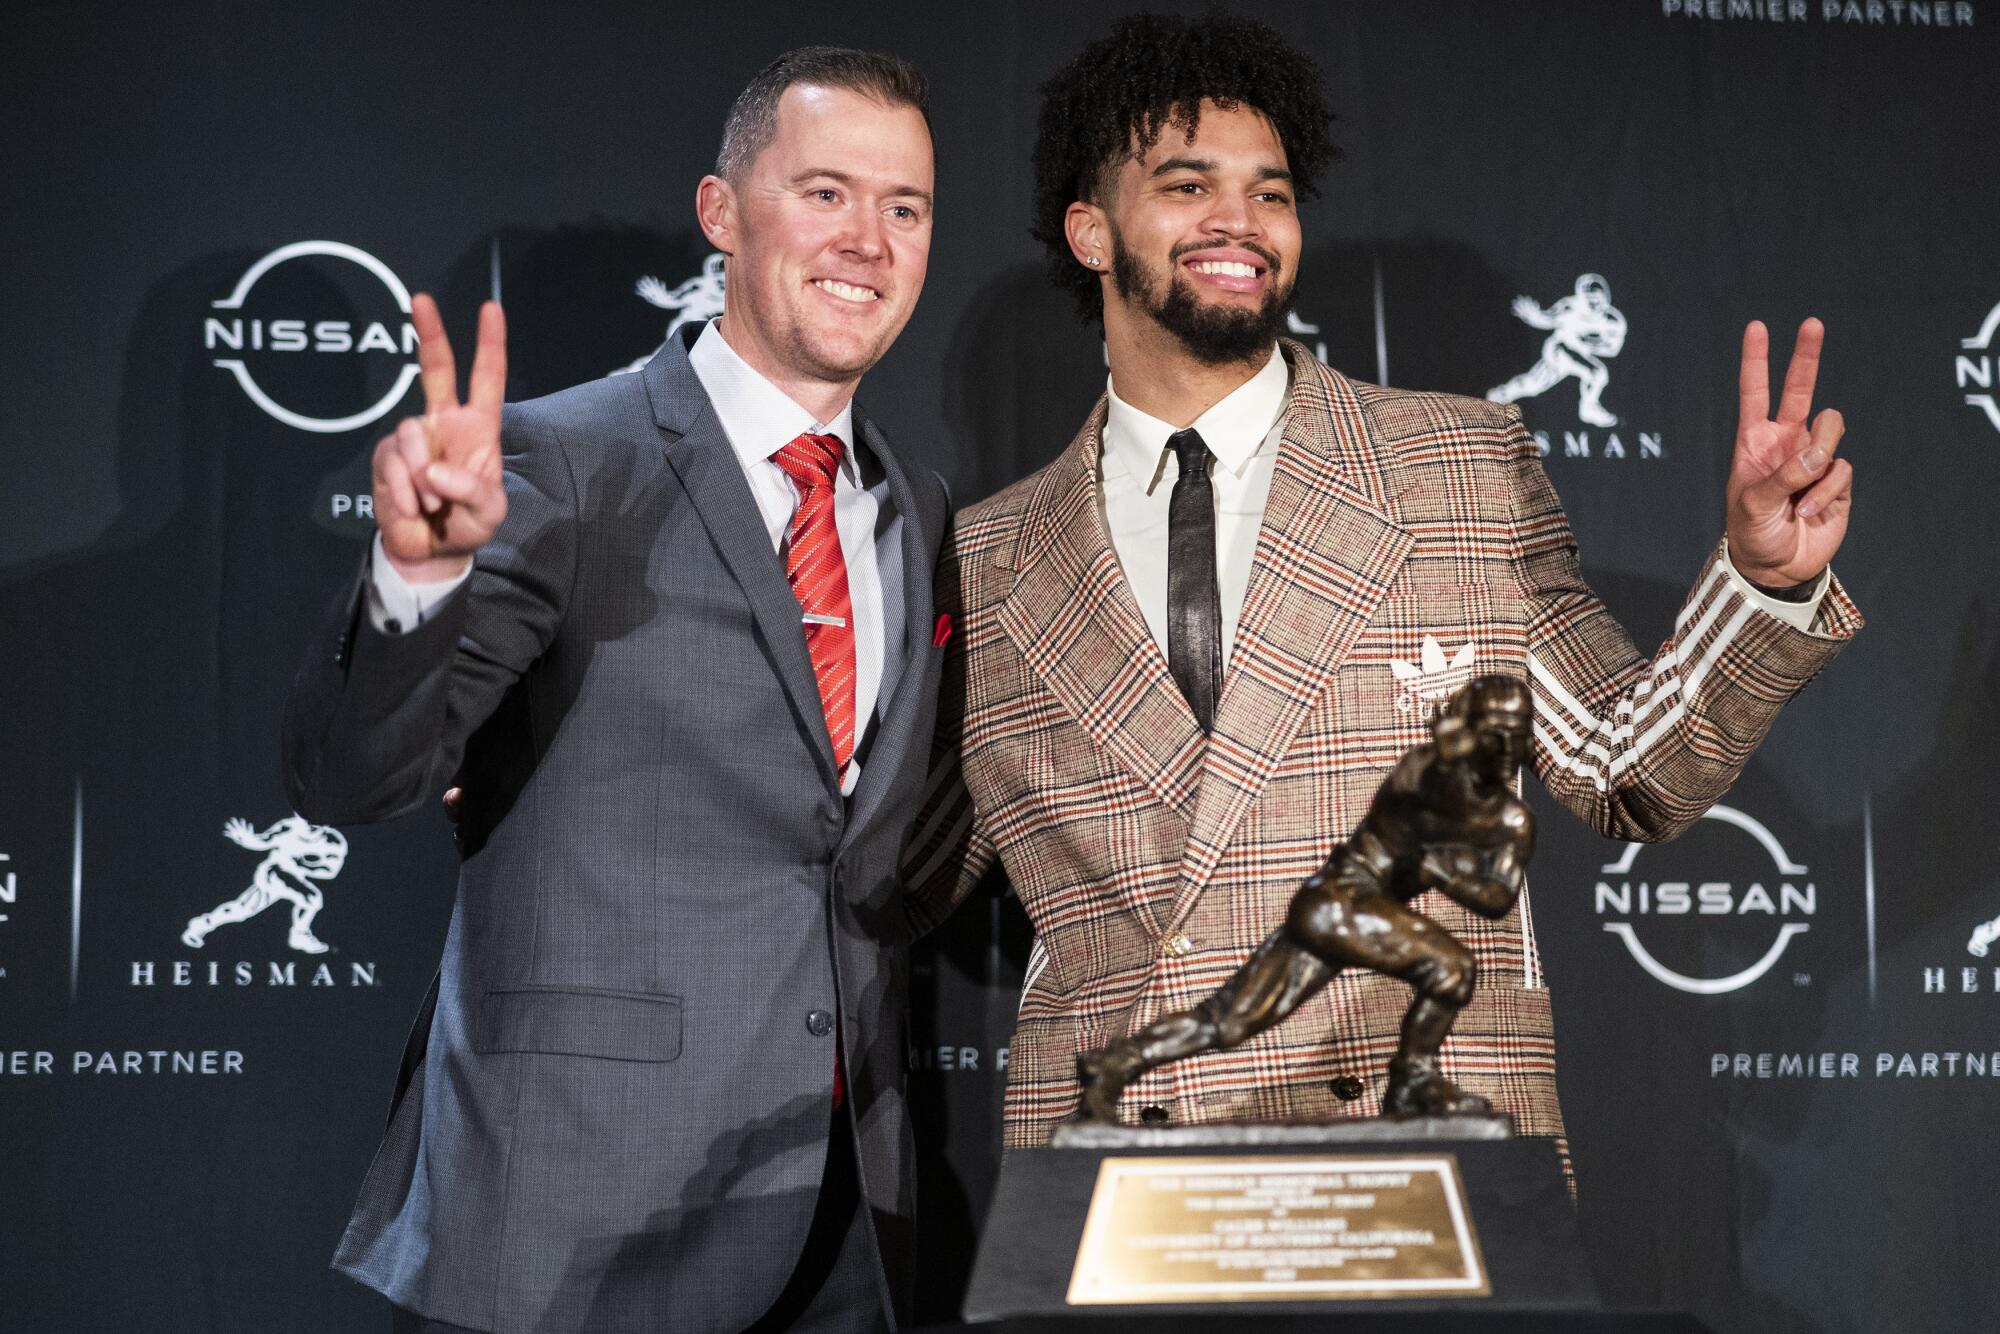 USC quarterback Caleb Williams and coach Lincoln Riley pose in front of the Heisman Trophy shortly after Williams won it